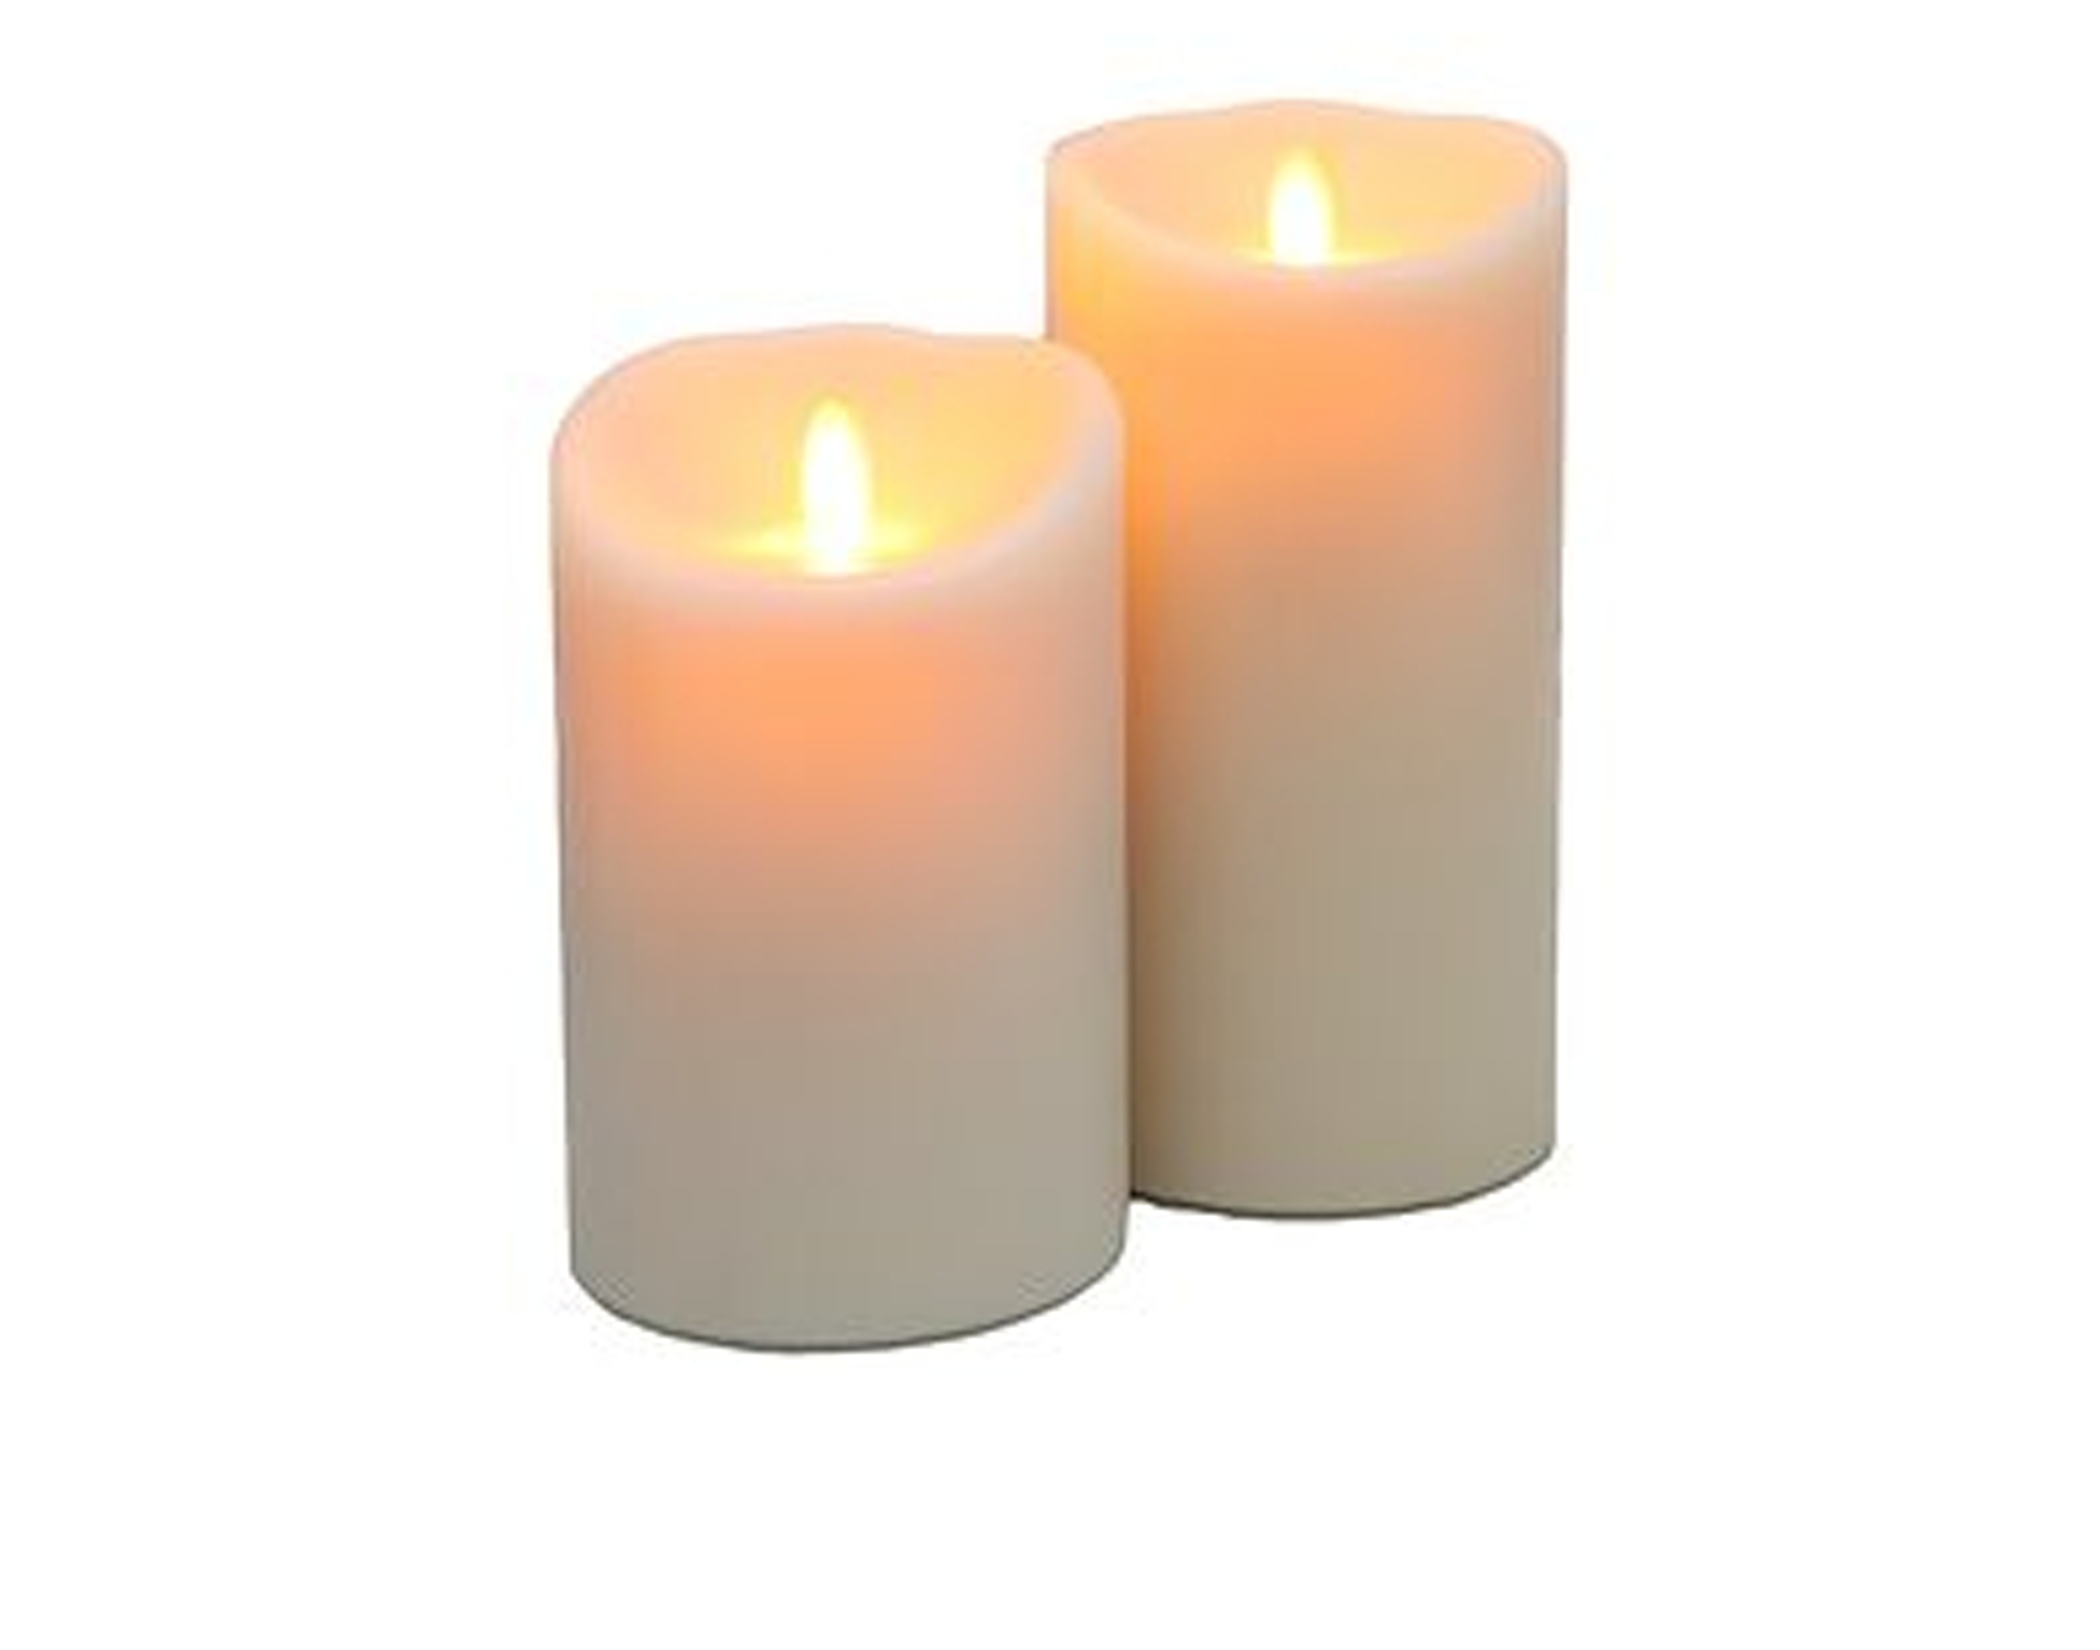 Candle  PNG HD-PlusPNG.com-80